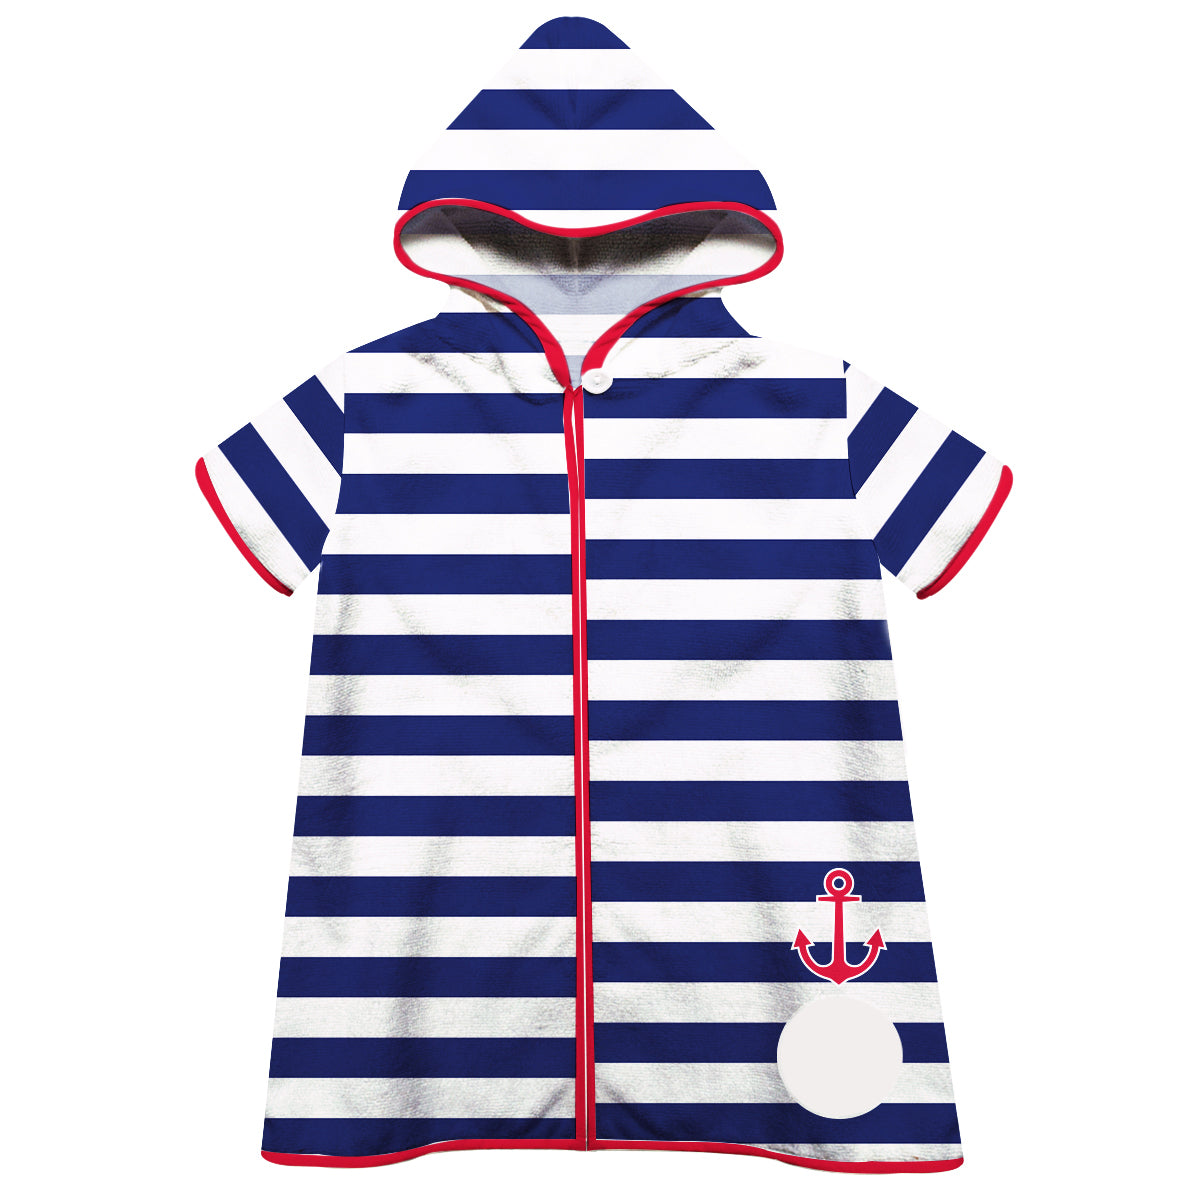 Anchor Monogram Navy and White Stripes Short Sleeve Cover Up - Wimziy&Co.